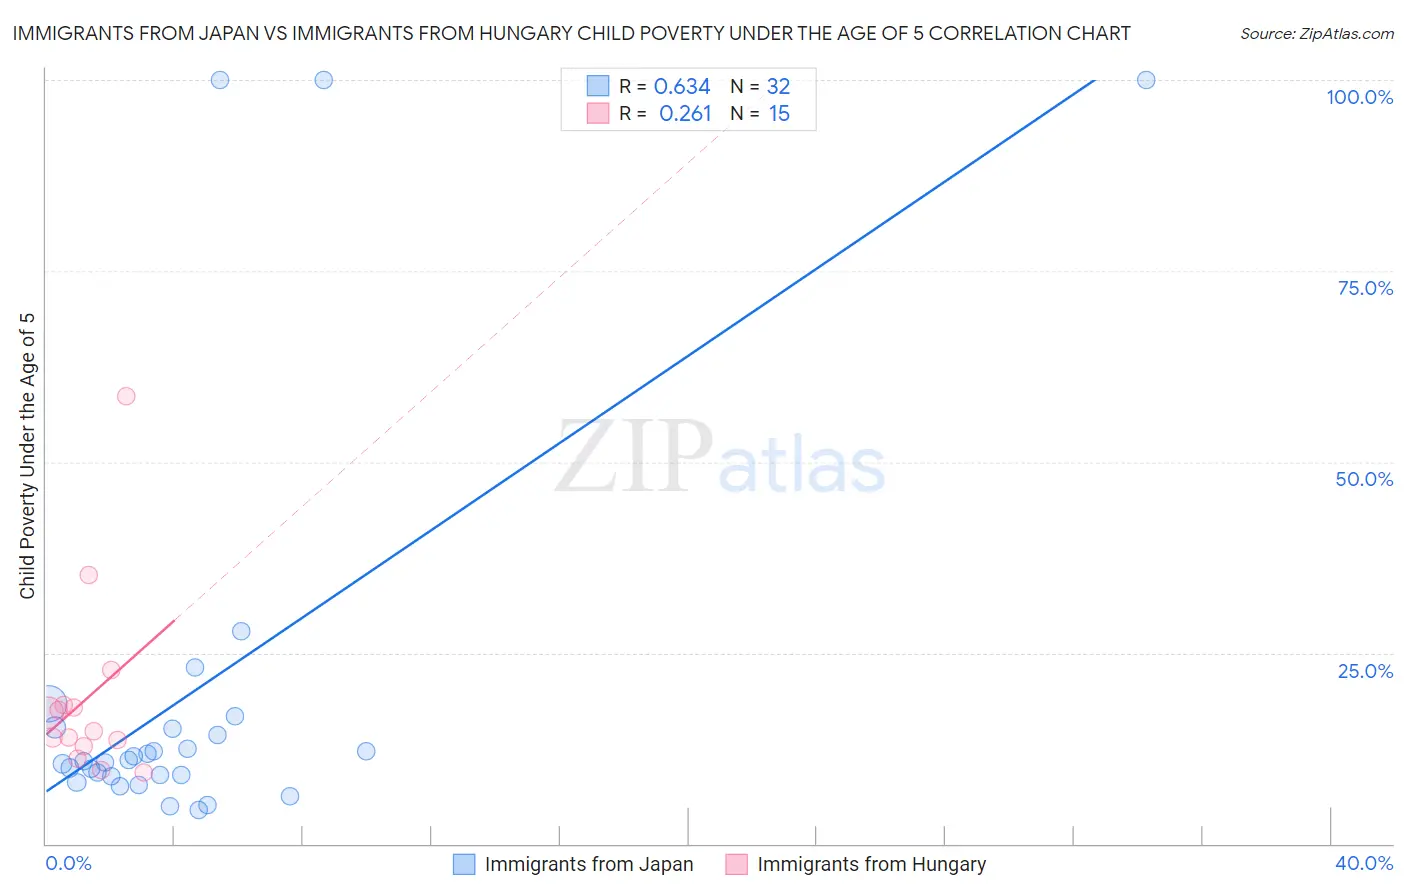 Immigrants from Japan vs Immigrants from Hungary Child Poverty Under the Age of 5